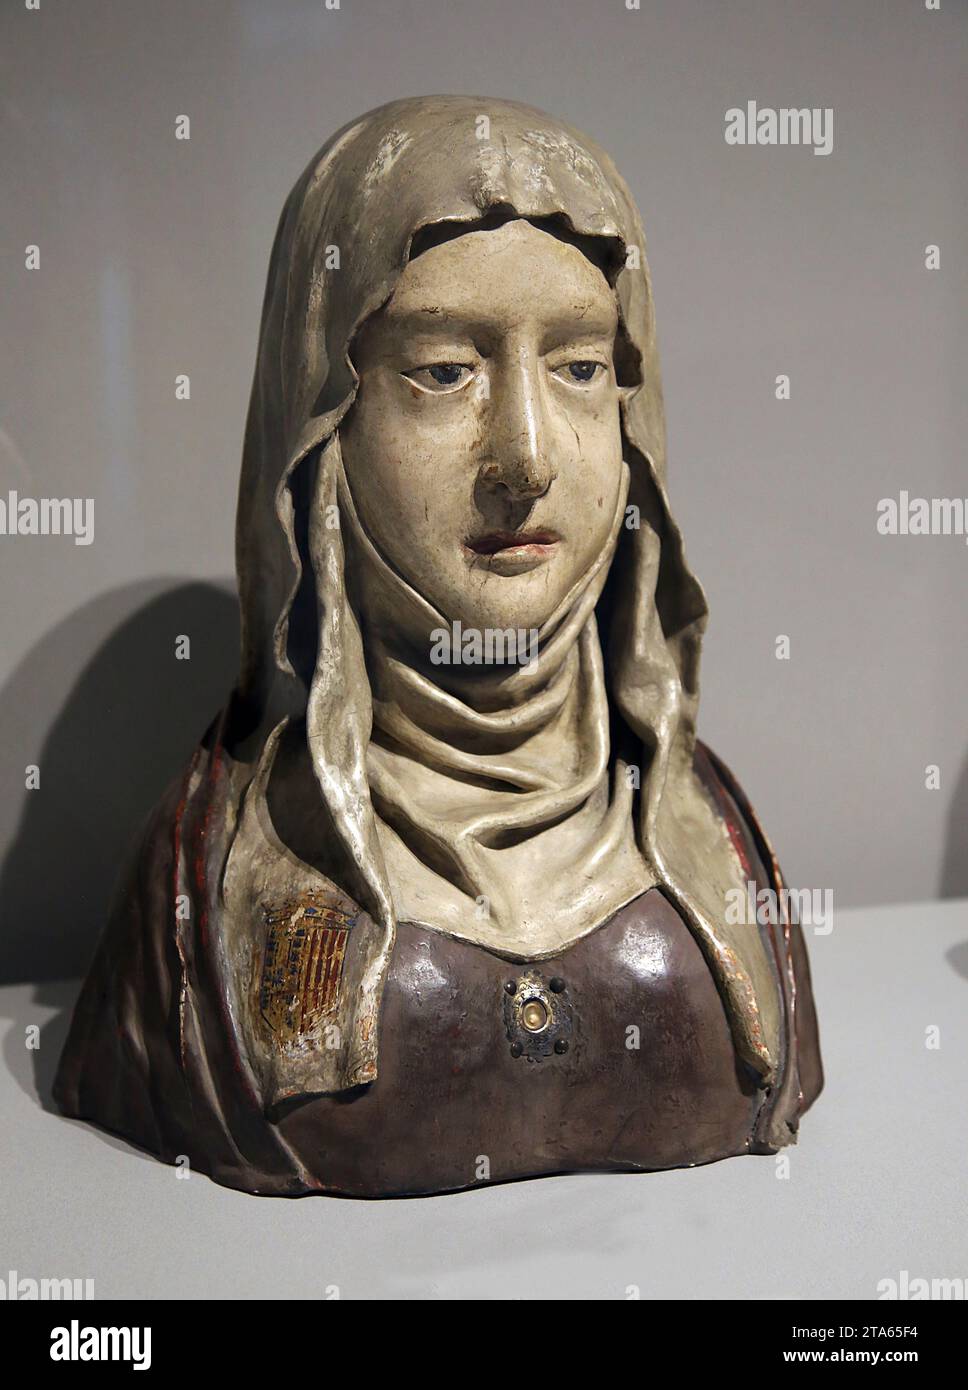 Reliquary bust of Saint Elizabeth of Hungria. 16th century. Unknown author. Wood carving and glued cloth polychromed. Museu Mares. Stock Photo